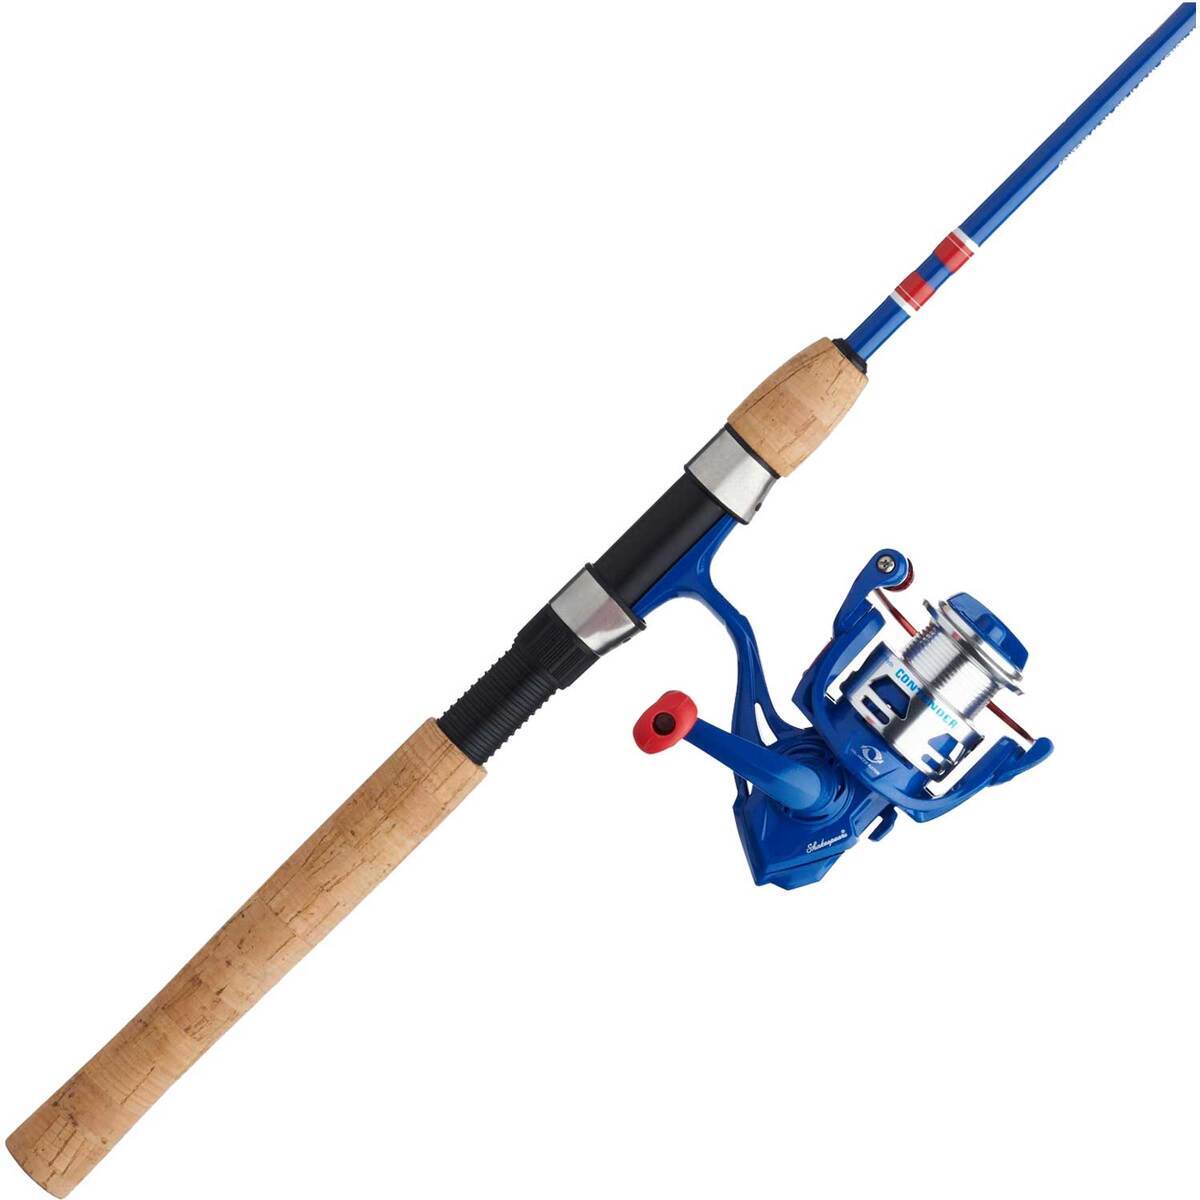 Shakespeare Contender Rod and Reel Spinning Combo - 6ft 6in